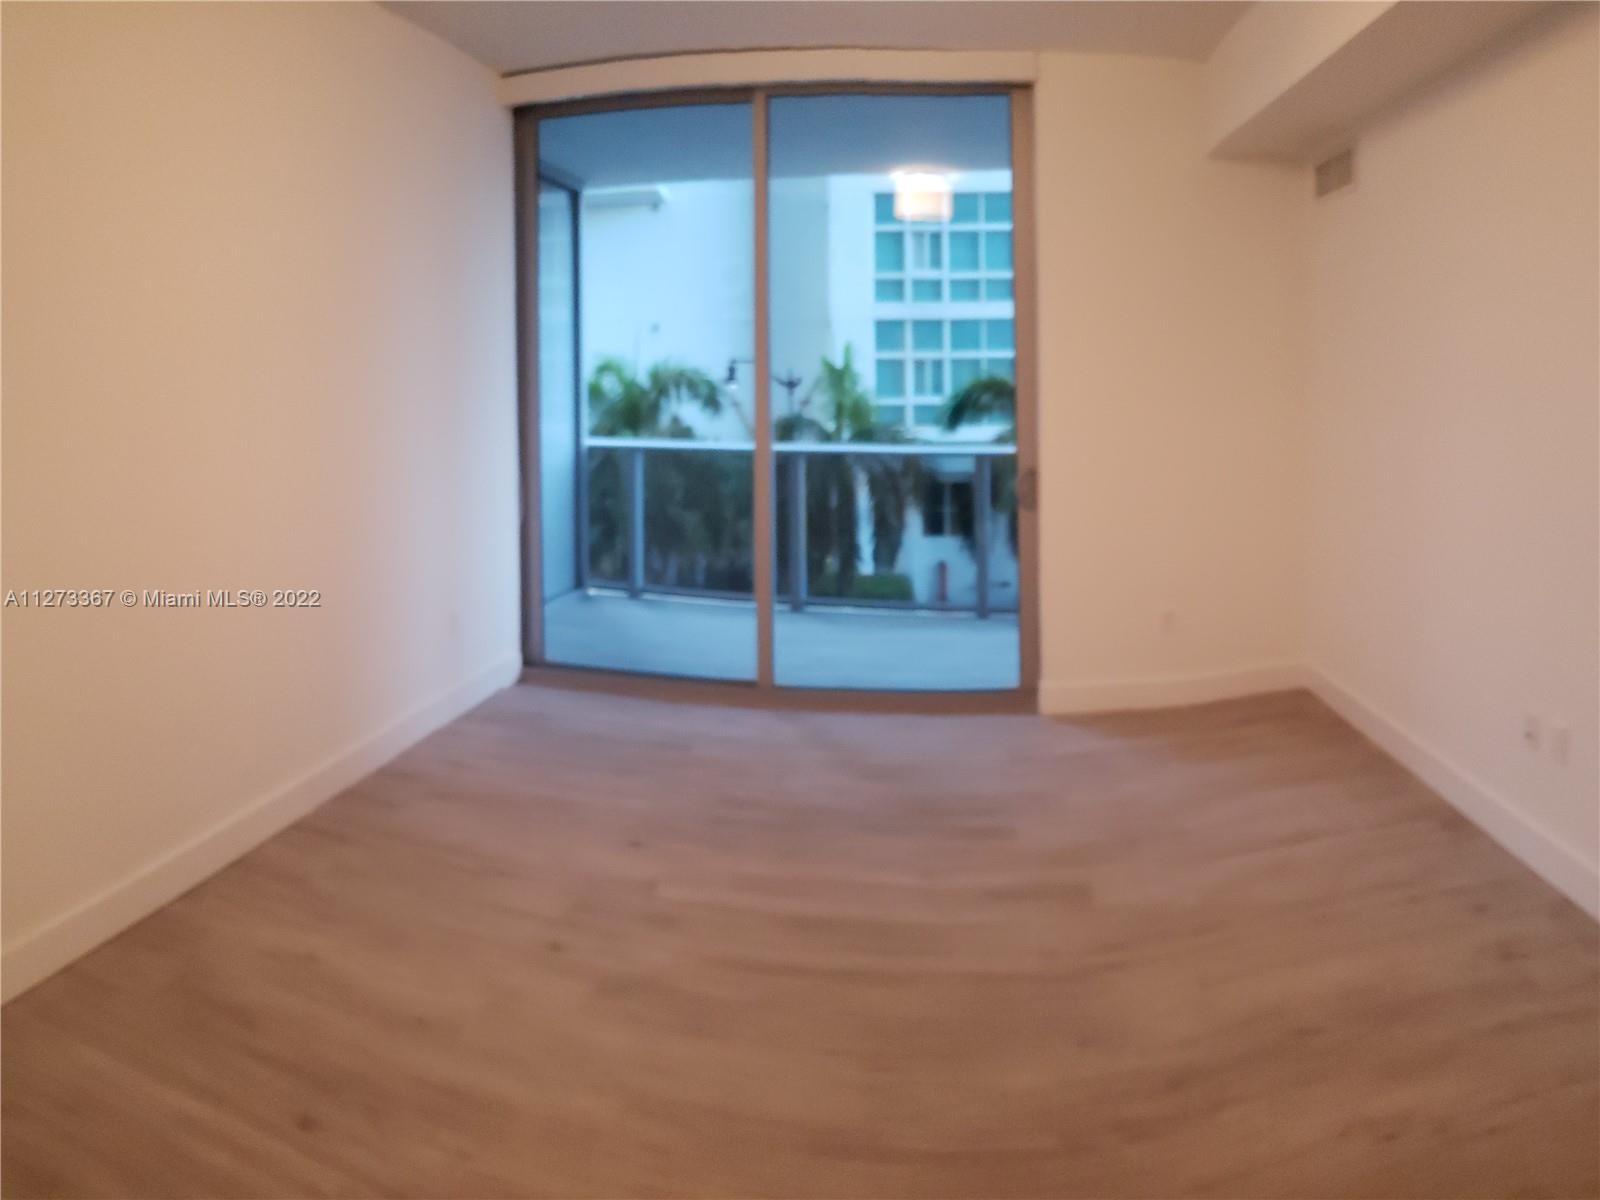 Luxurious 1bed/1.5baths with Large balcony, 1 Assigned Parking. Overlooking Miami City. Panoramic wi